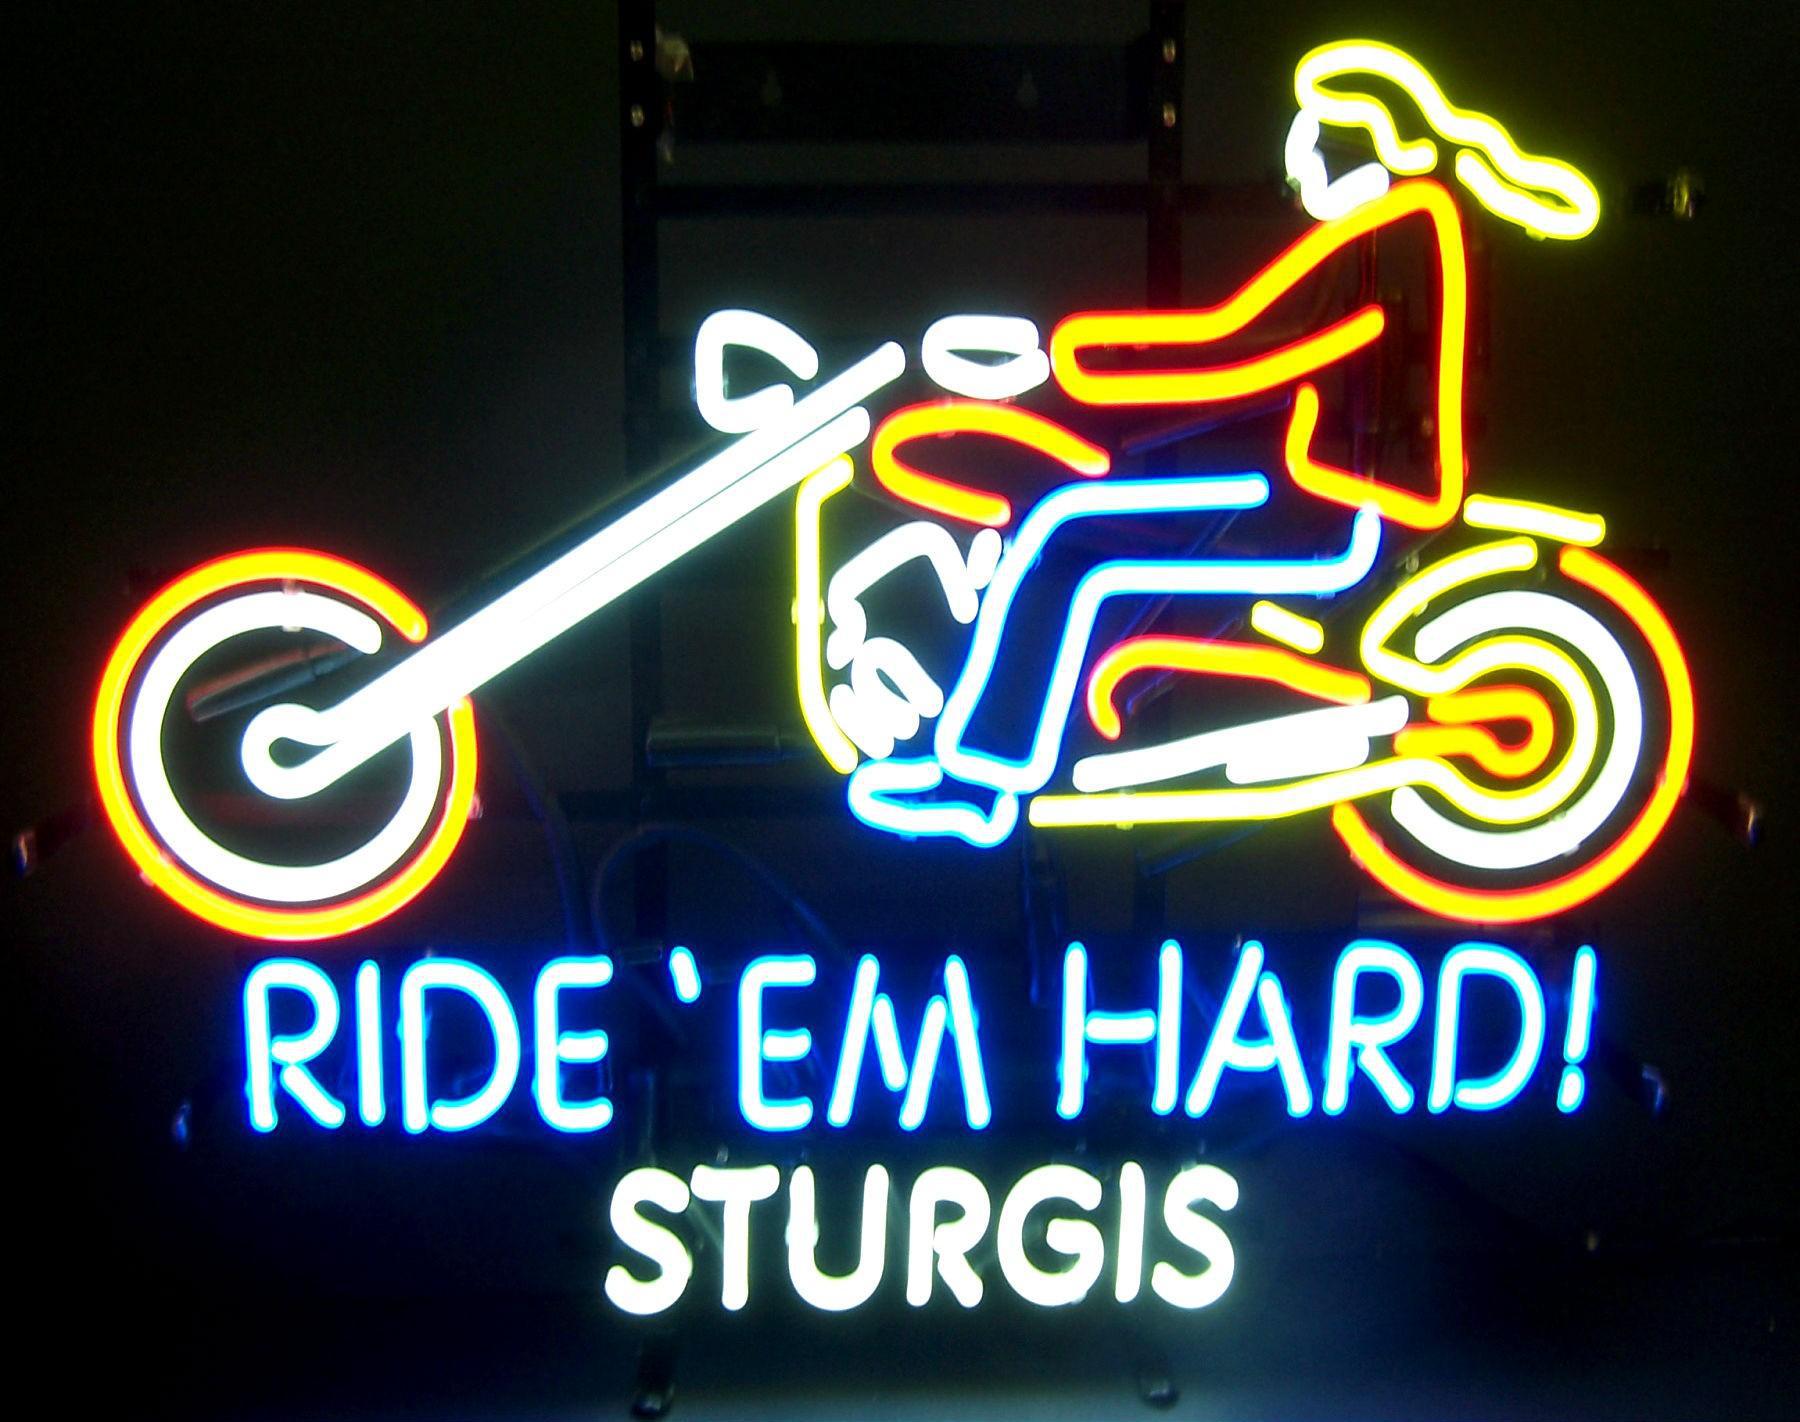 Neon to sturgis - - High Quality and Resolution